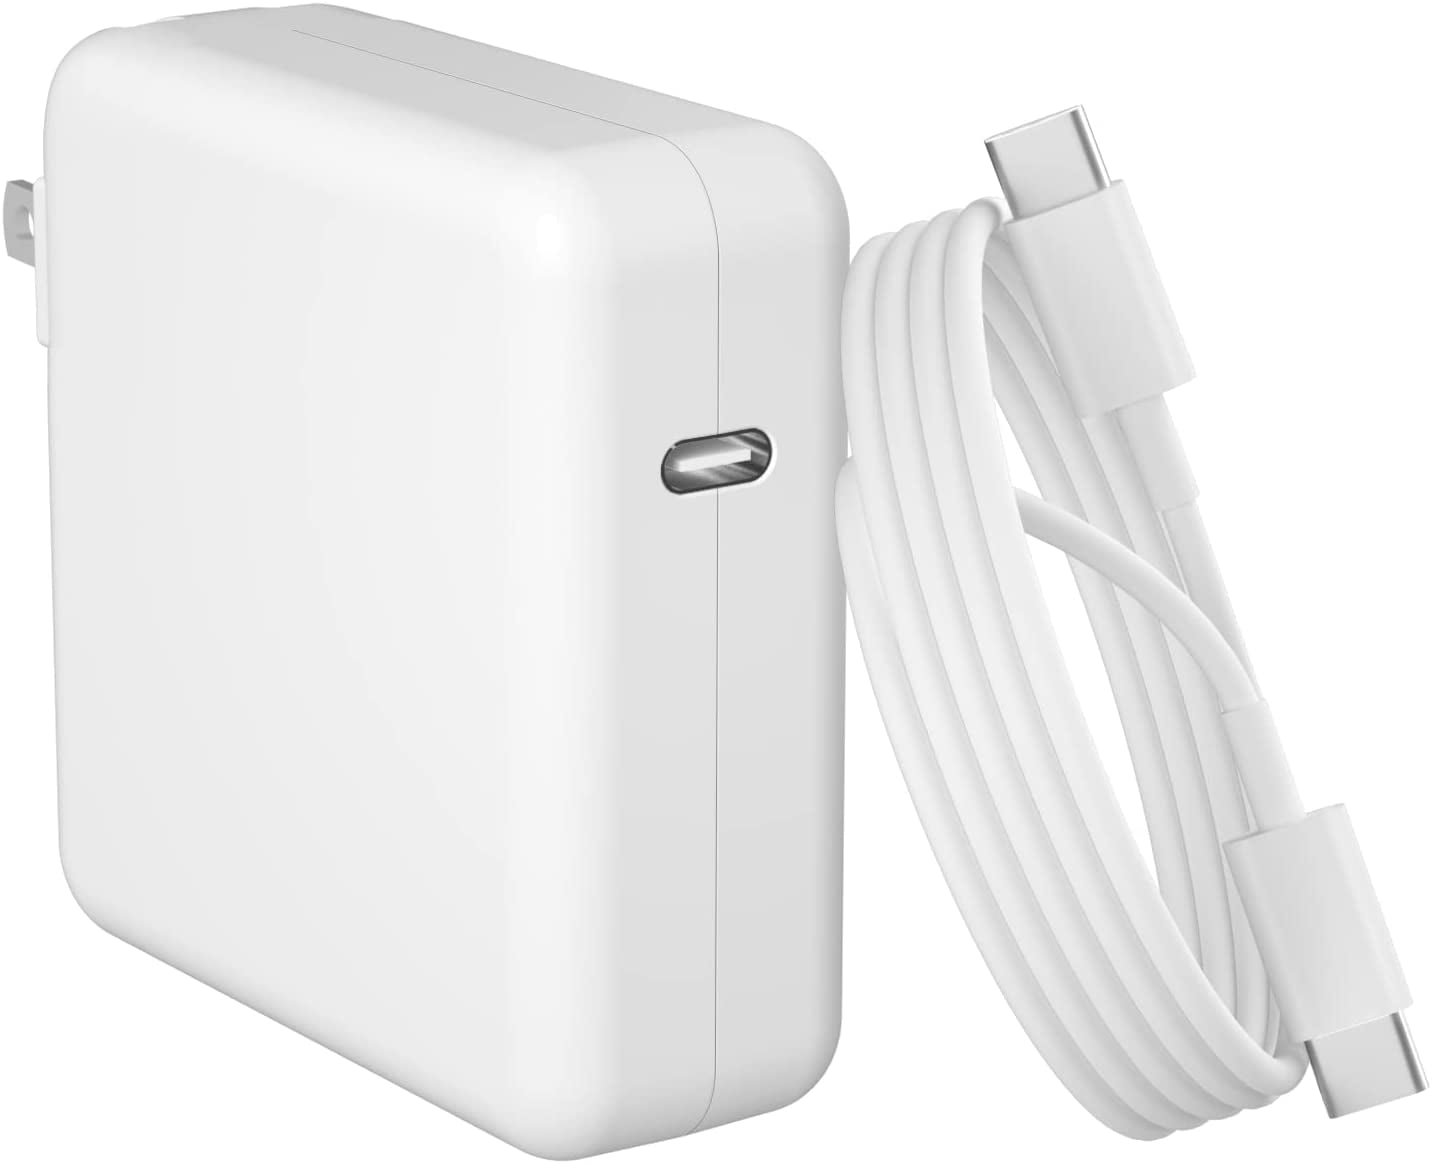 MacBook Pro Charger - 70W USB-C Power Adapter Compact and Foldable Fast  Charger for MacBook Pro, MacBook Air, Samsung Galaxy, iPad Pro, and All USB  C